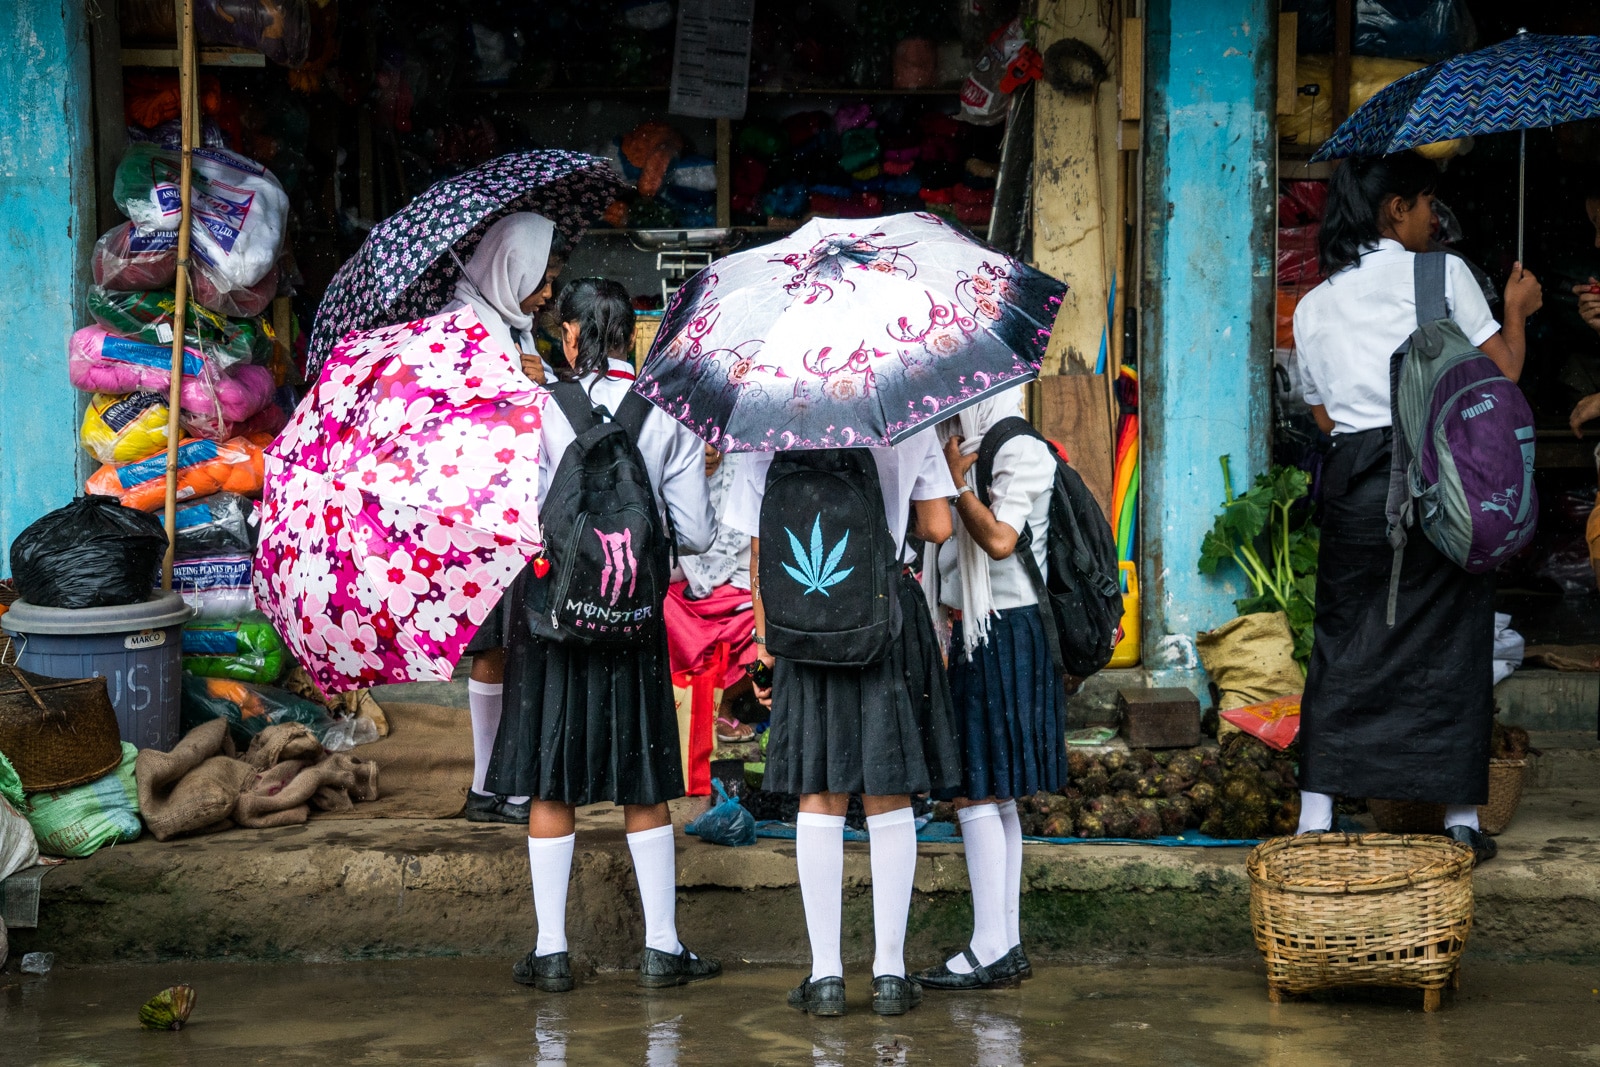 Monsoon travel packing list - Girls with umbrellas in Moirang, India - Lost With Purpose